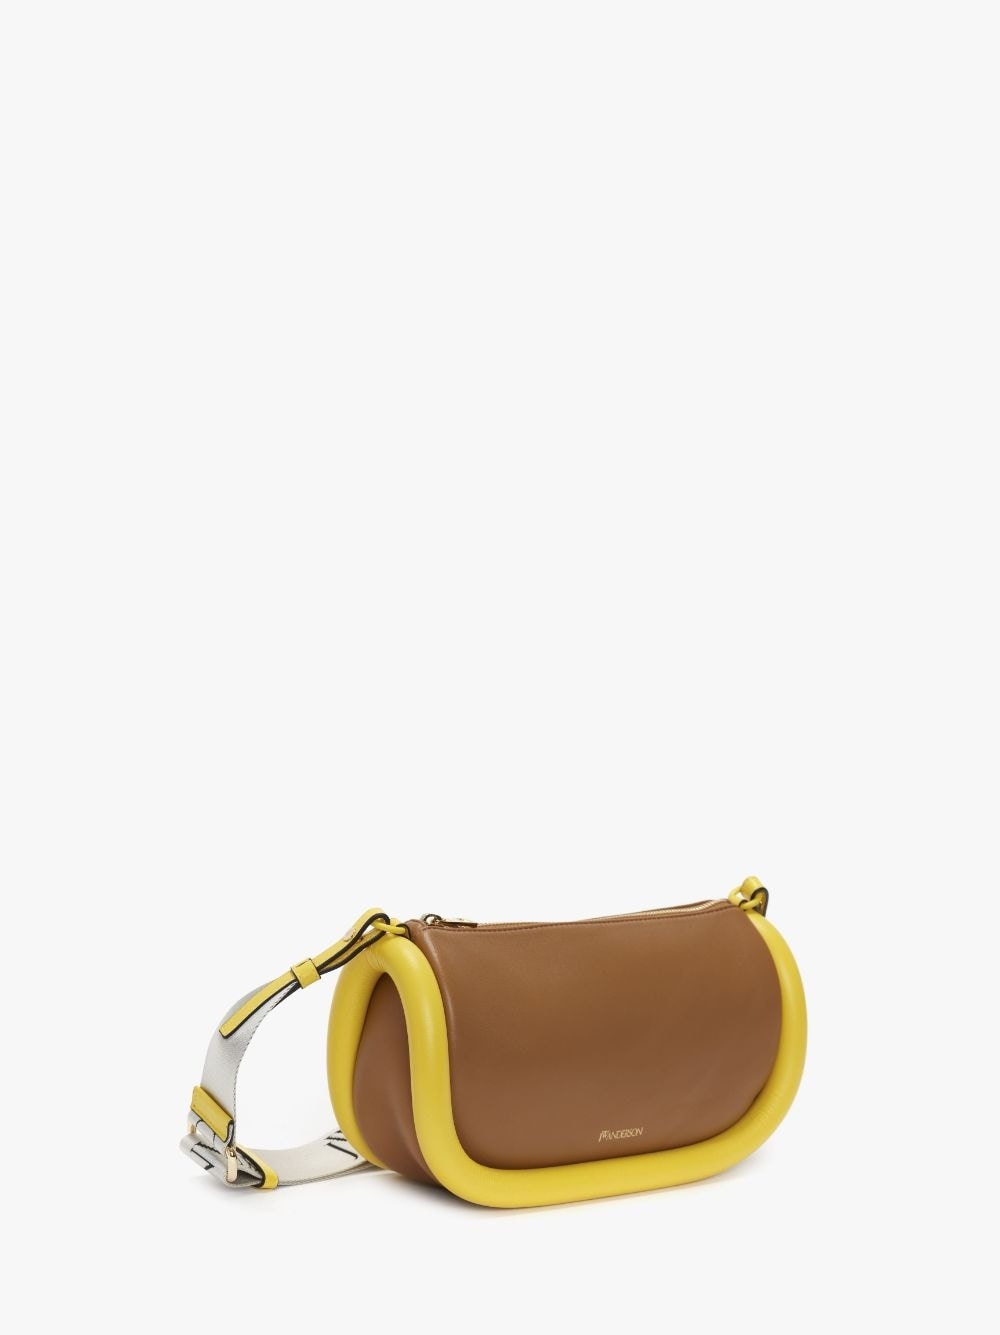 BUMPER-15 - LEATHER CROSSBODY BAG WITH ADDITIONAL WEBBING STRAP - 2